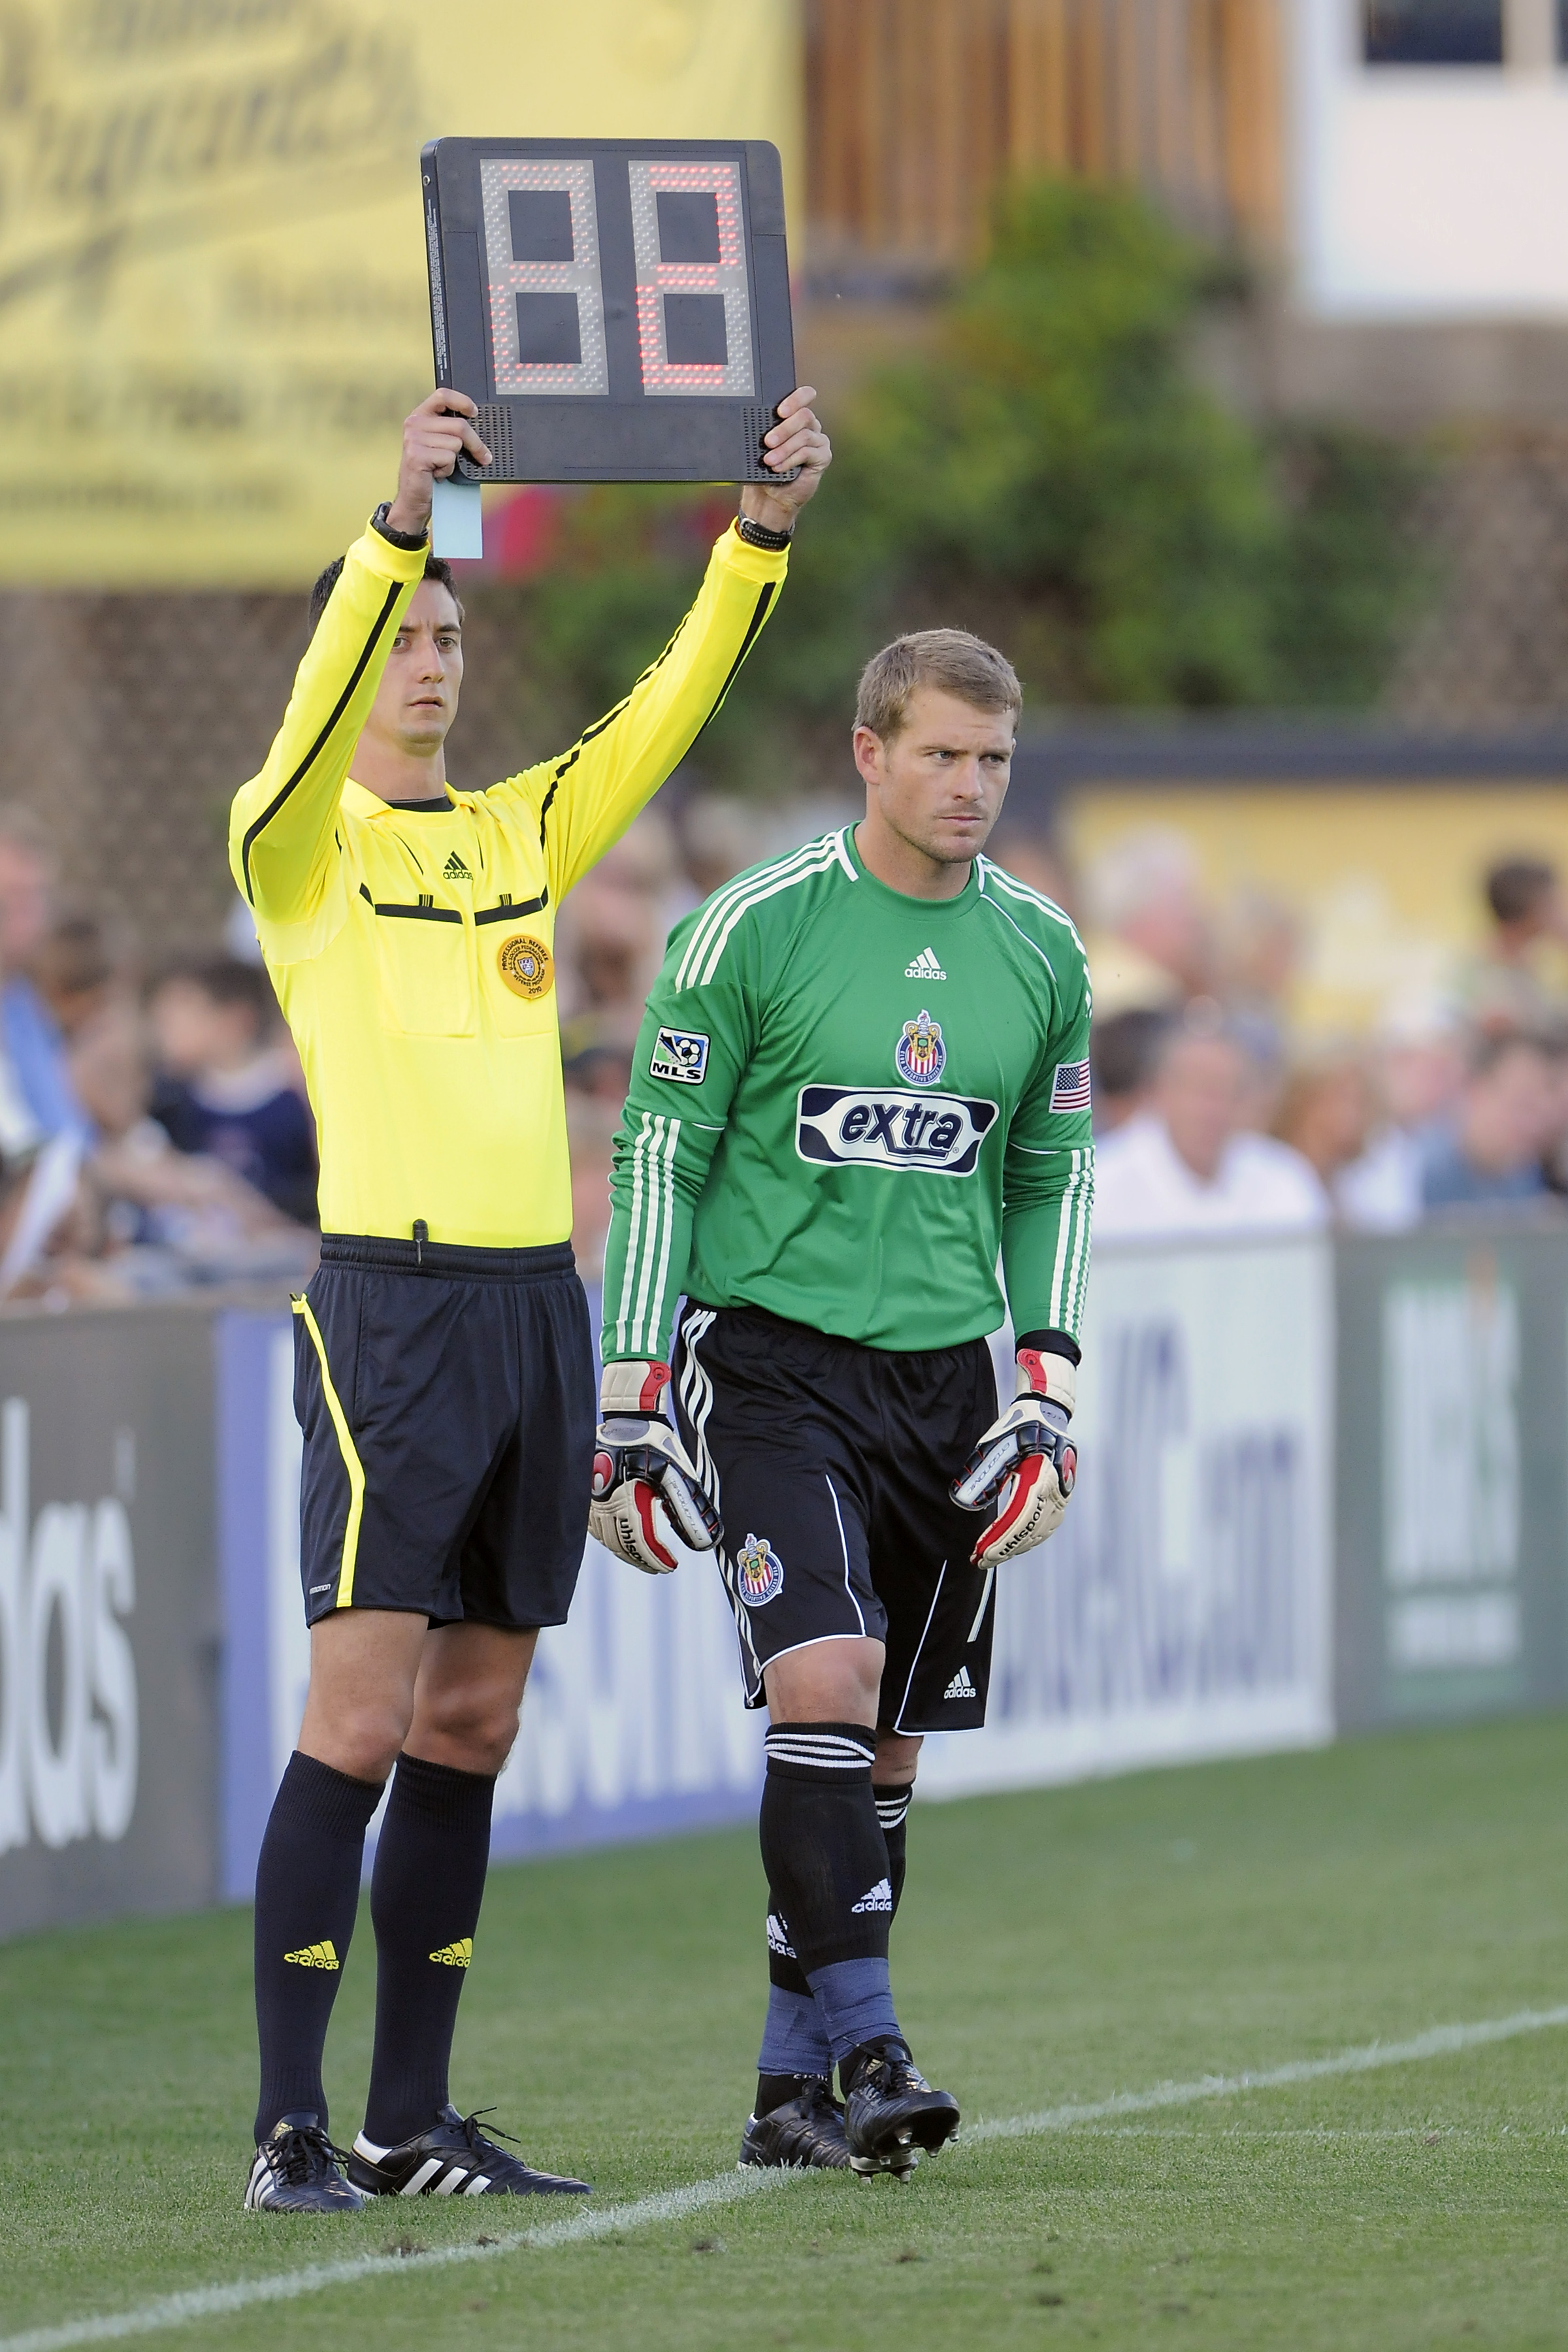 KANSAS CITY, KS - JULY 10: Goalkeeper Dan Kennedy #1 of Chivas USA substitutes for Zach Thornton #22 (not pictured) after an injury against the Kansas City Wizards defends at CommunityAmerica Ballpark July 10, 2010 in Kansas City, Kansas. Chivas USA defea